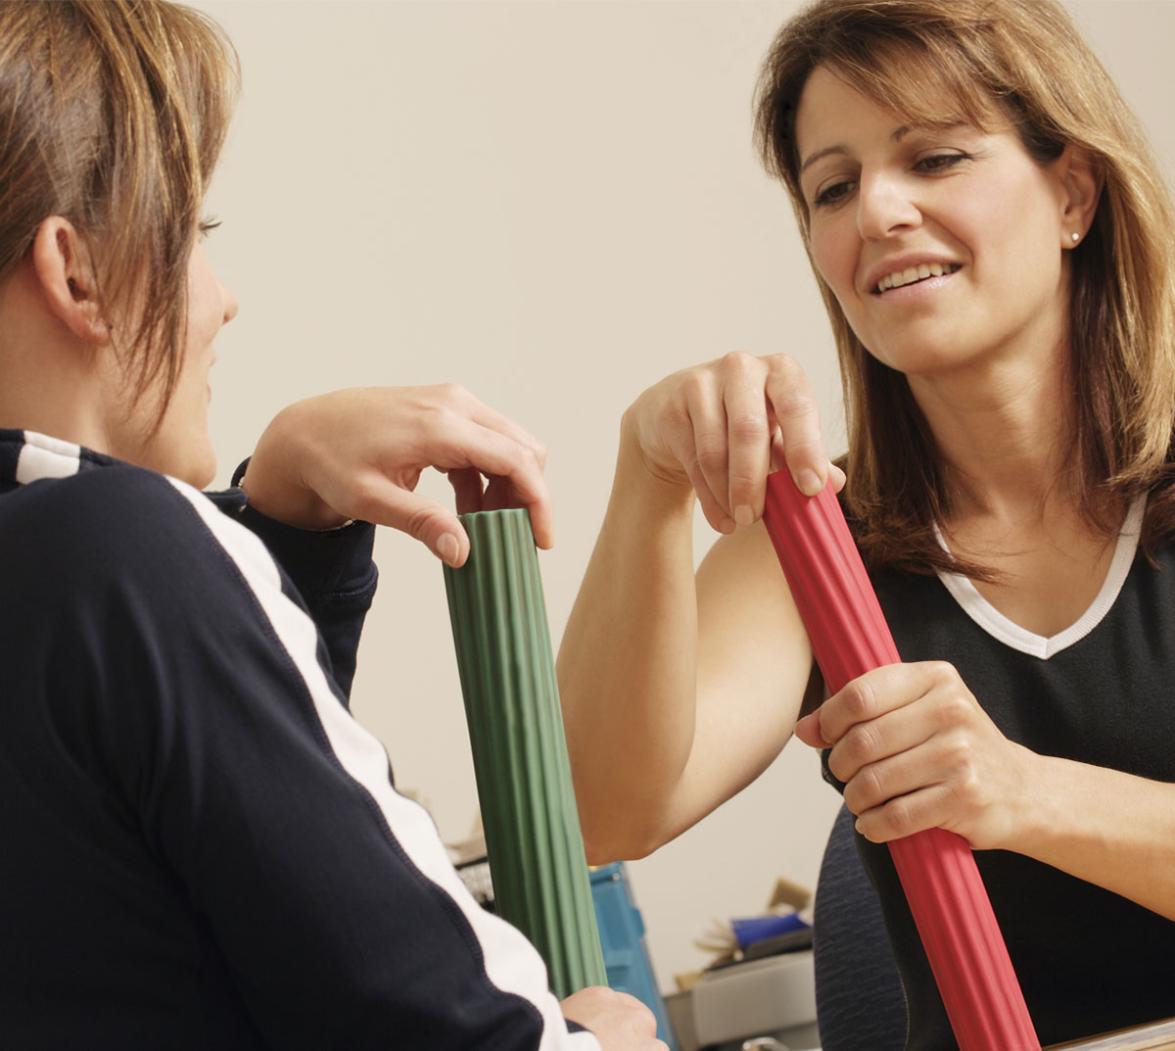 What Are Some Common Challenges People Face During Occupational Therapy?